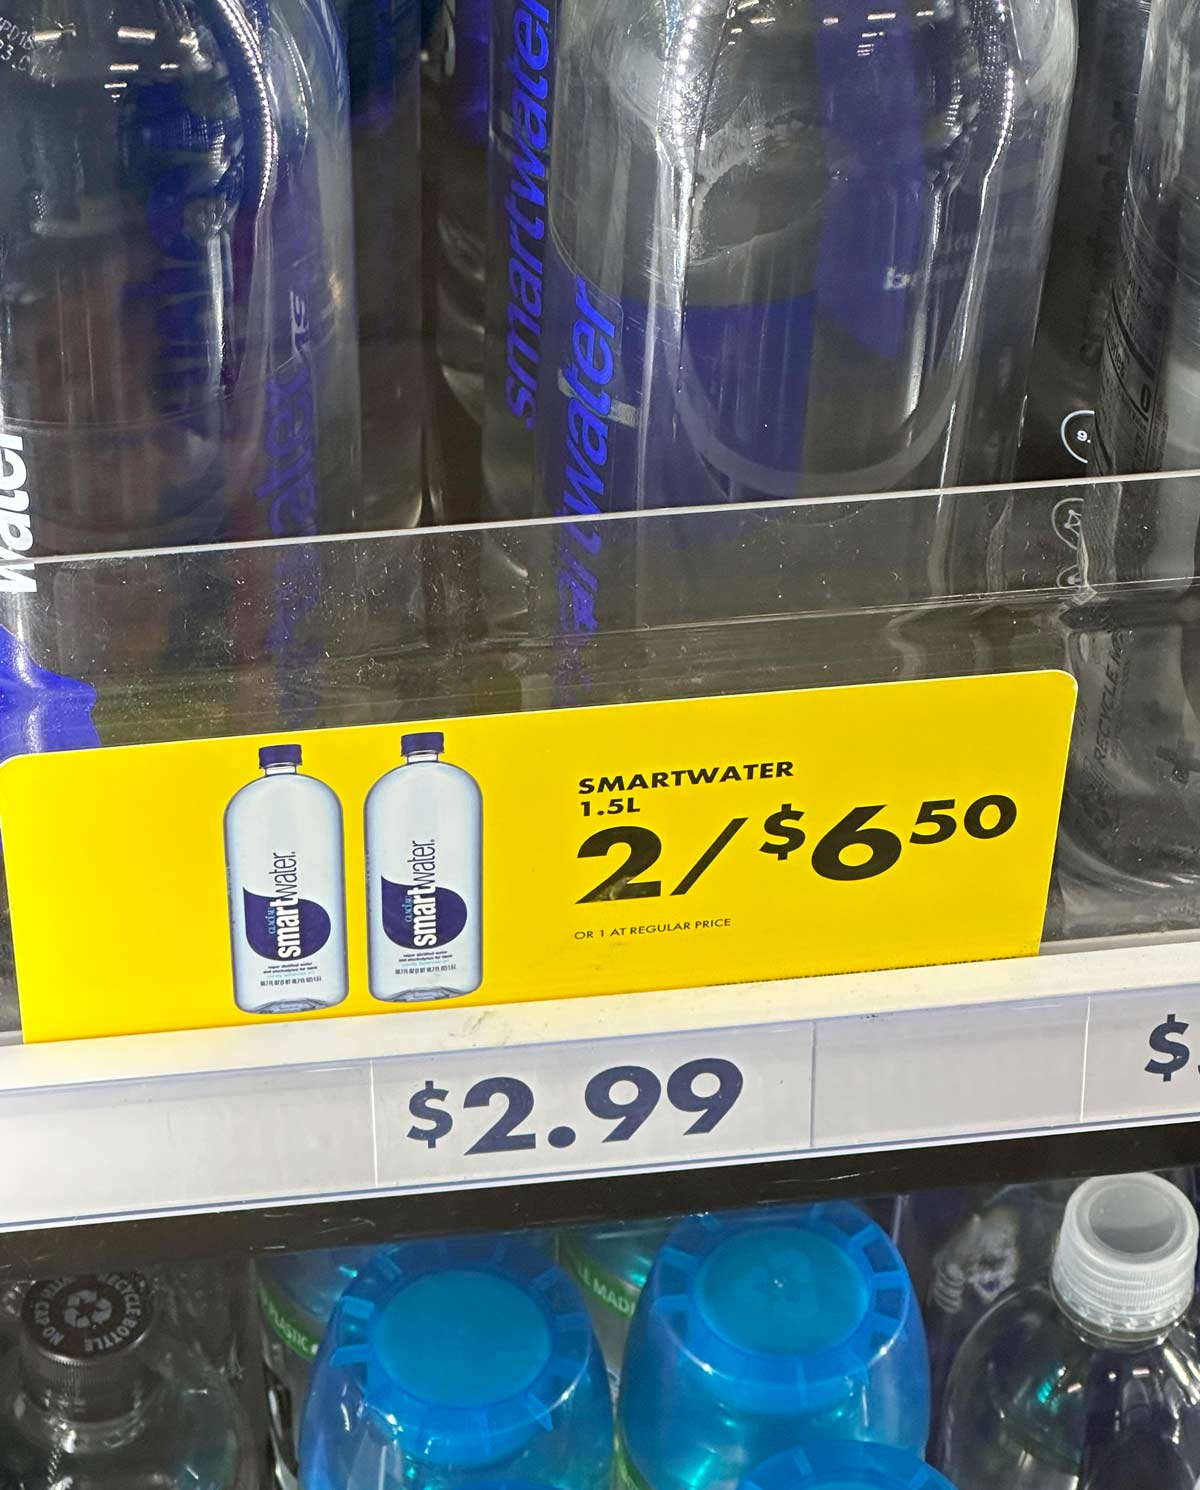 Smartwater Buy 2 and pay more!